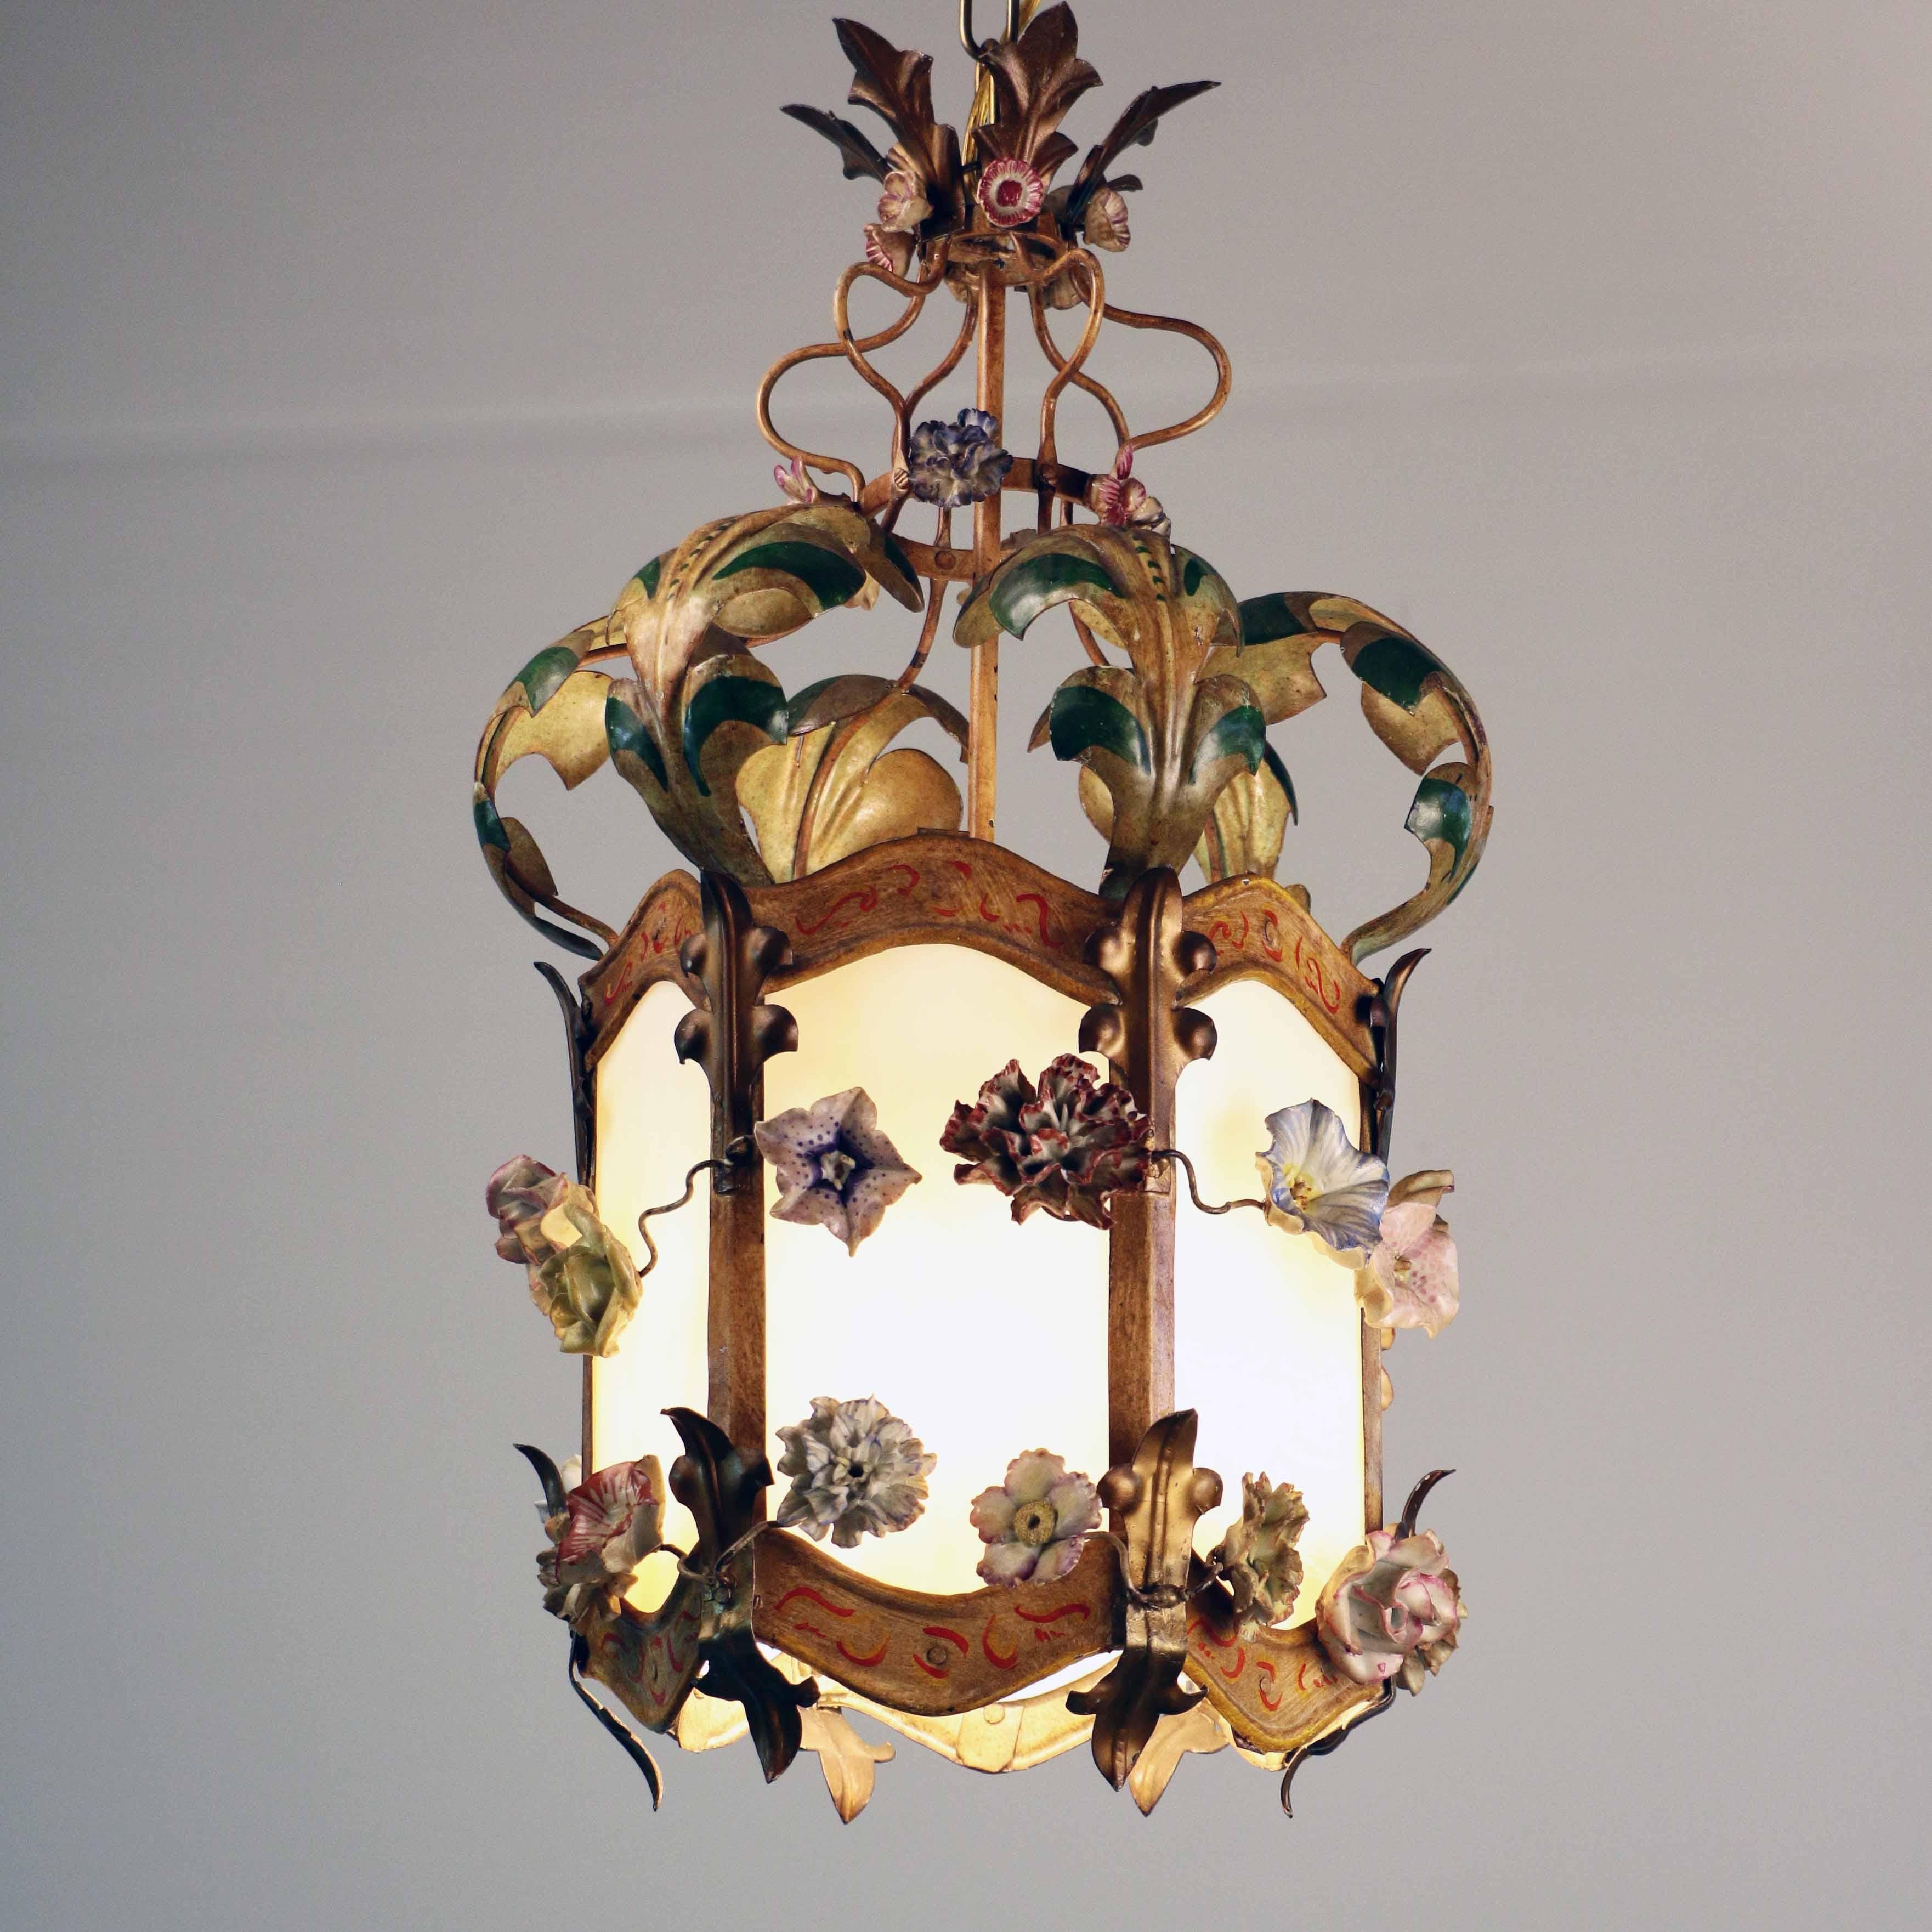 This charming whimsical French lantern interprets playfully the Louis XV style, retaining its essence while abandoning formality. The hexagon frame and ornamental acanthus and leaves are artfully constructed in tole and then painted, the polychrome